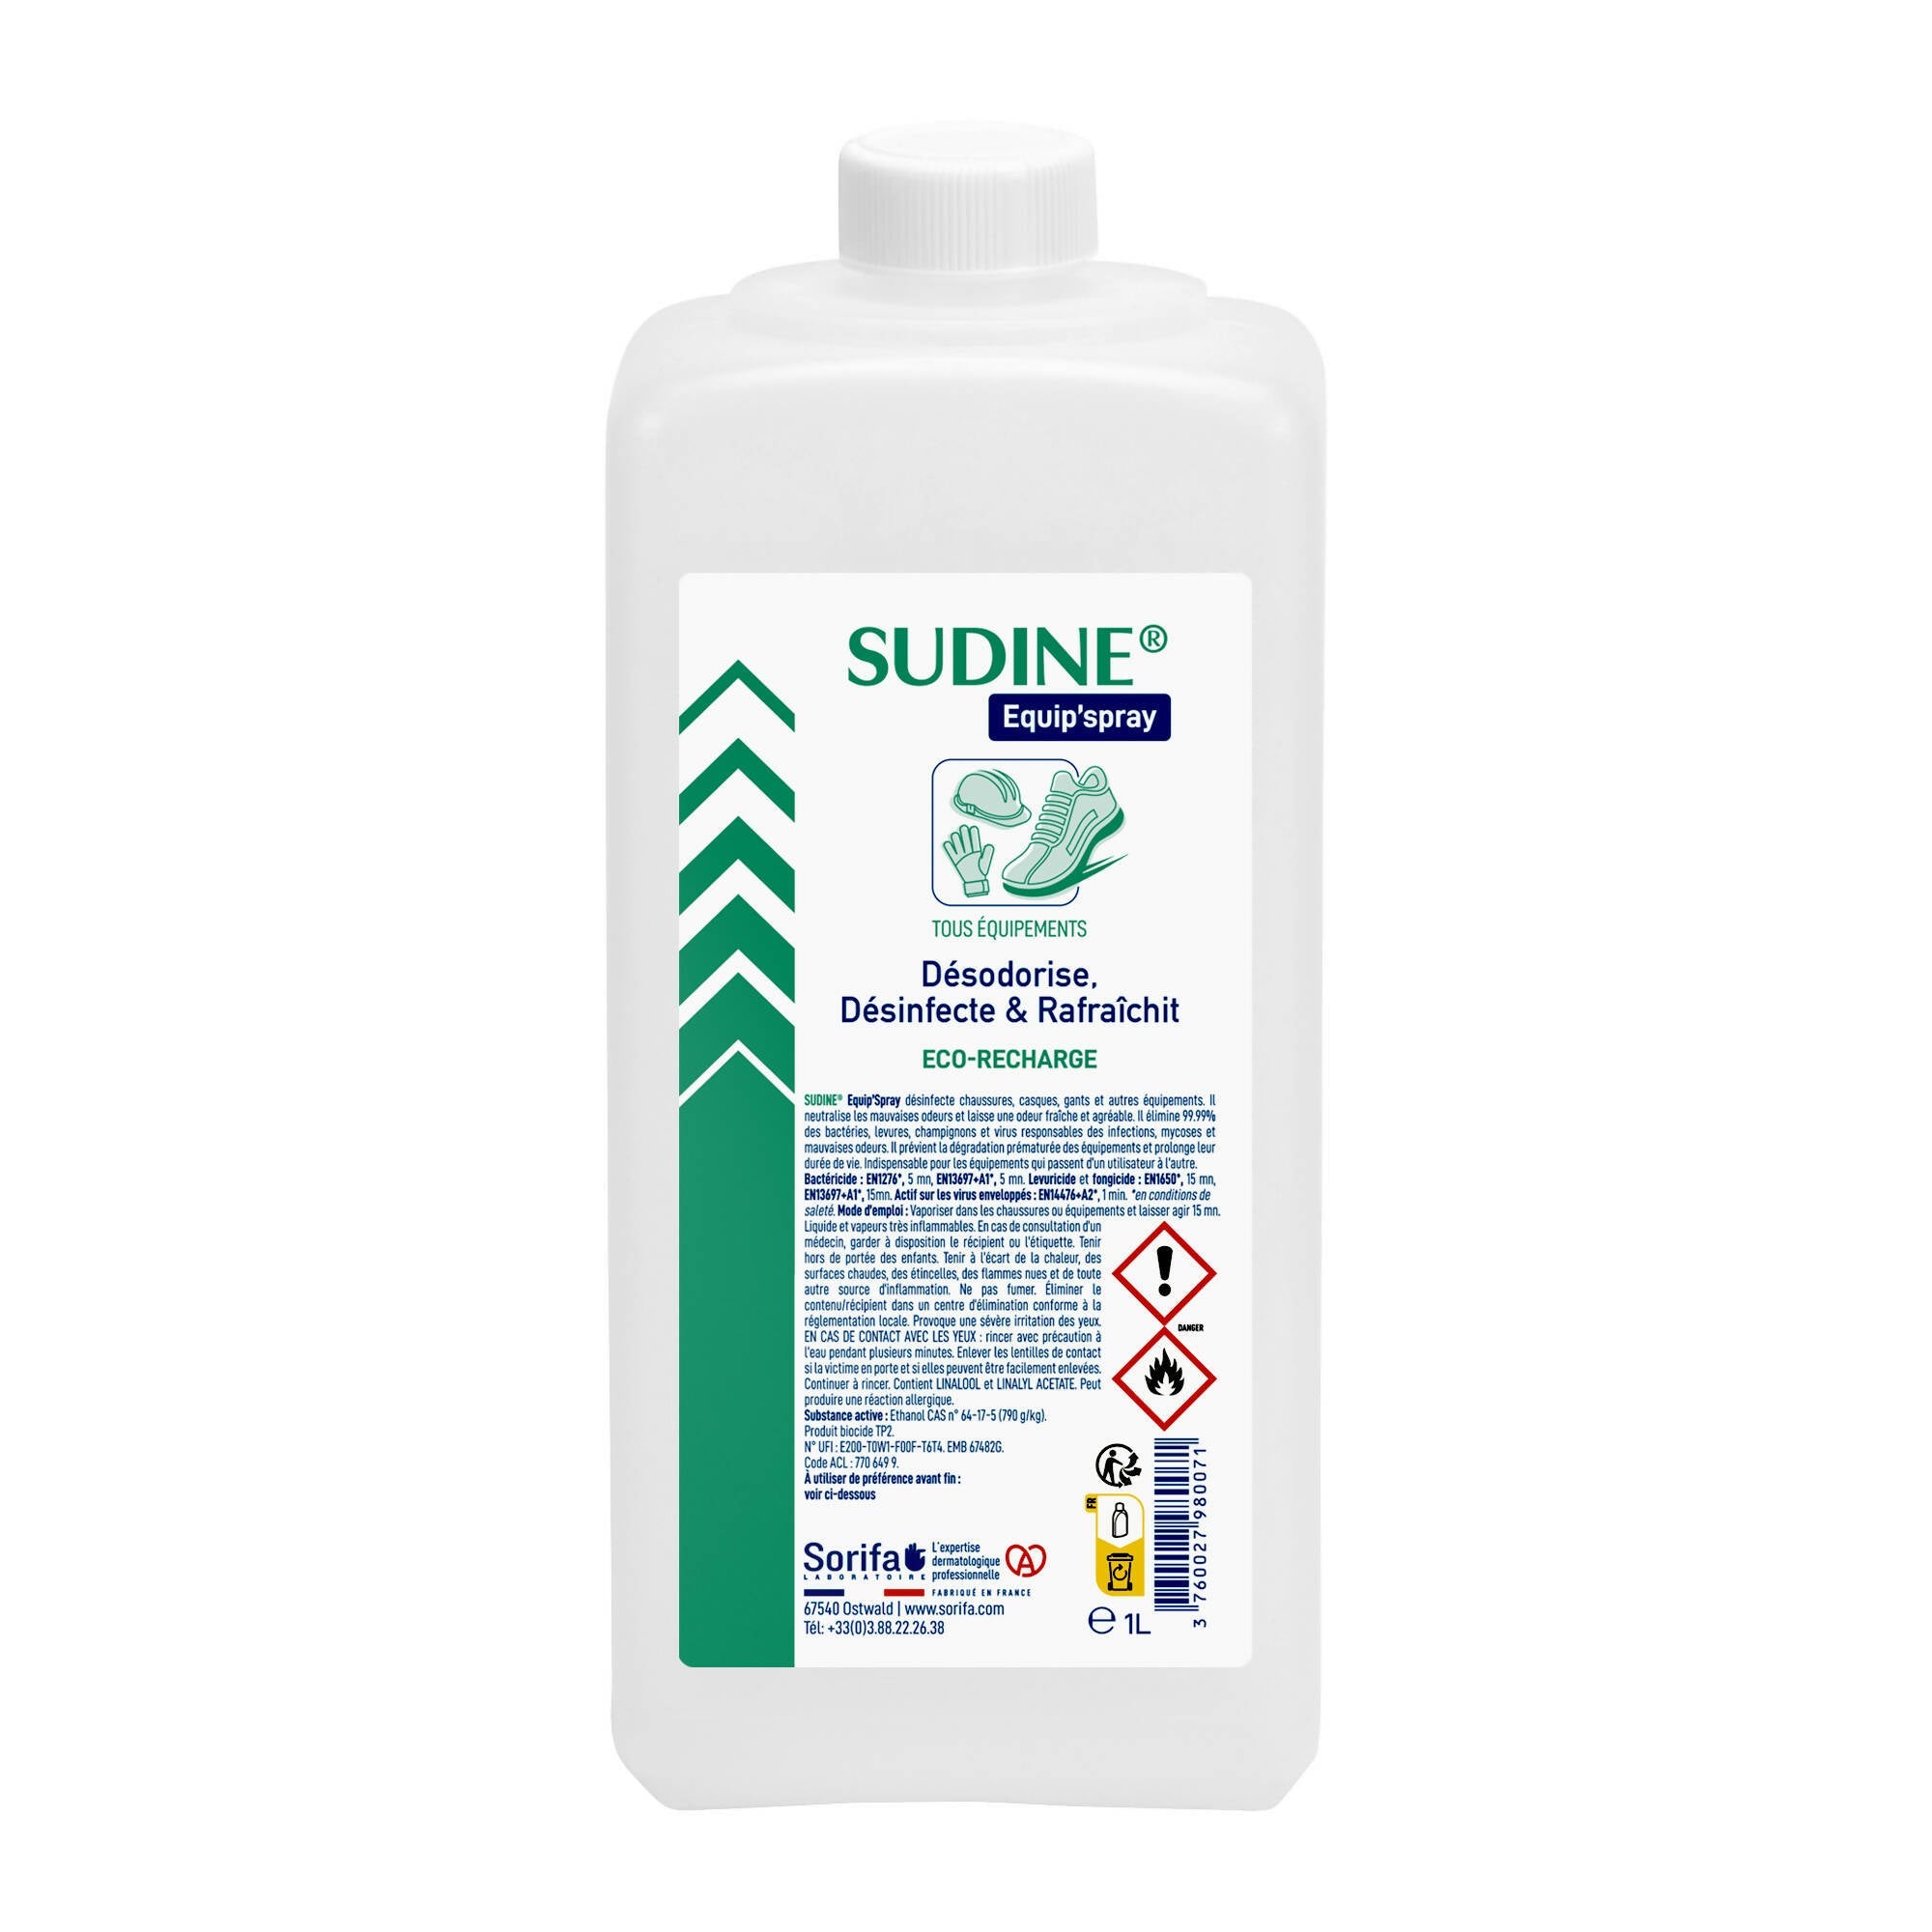 SORIFA - Set of 2 - Sudine Equip'spray - Deodorizes, disinfects, refreshes - Shoes, helmets, gloves, equipment - 1L refill for SUDINE Equip'spray 50 and 125 ml or for the 1L SORIFA Spray - 0